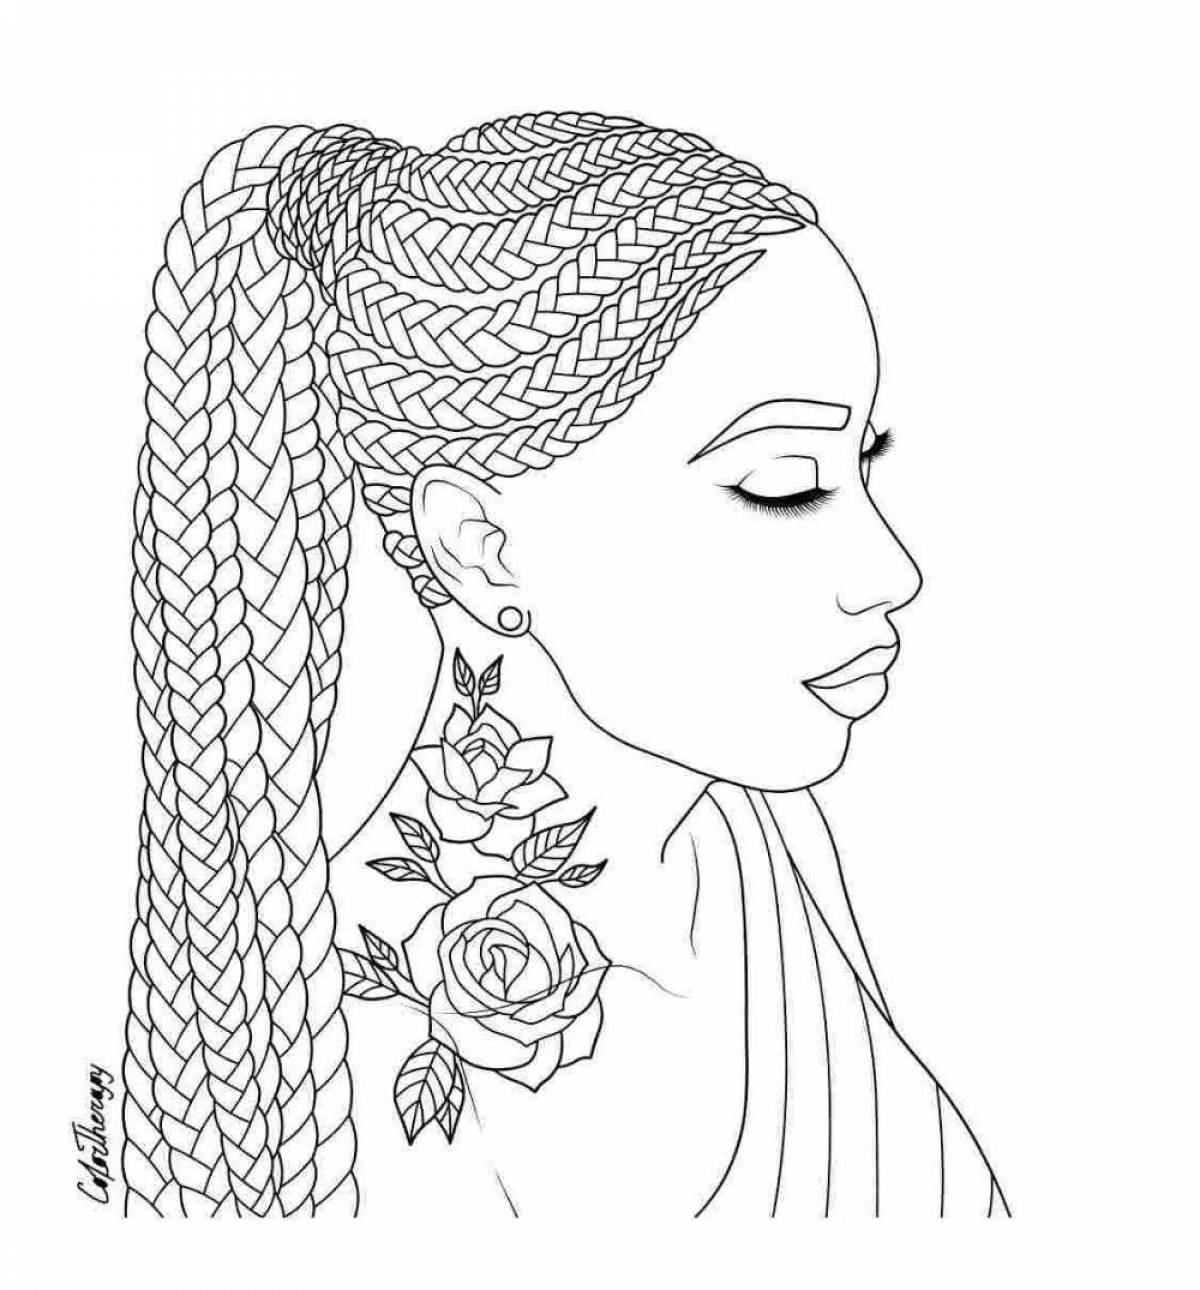 Fun pigtail coloring page